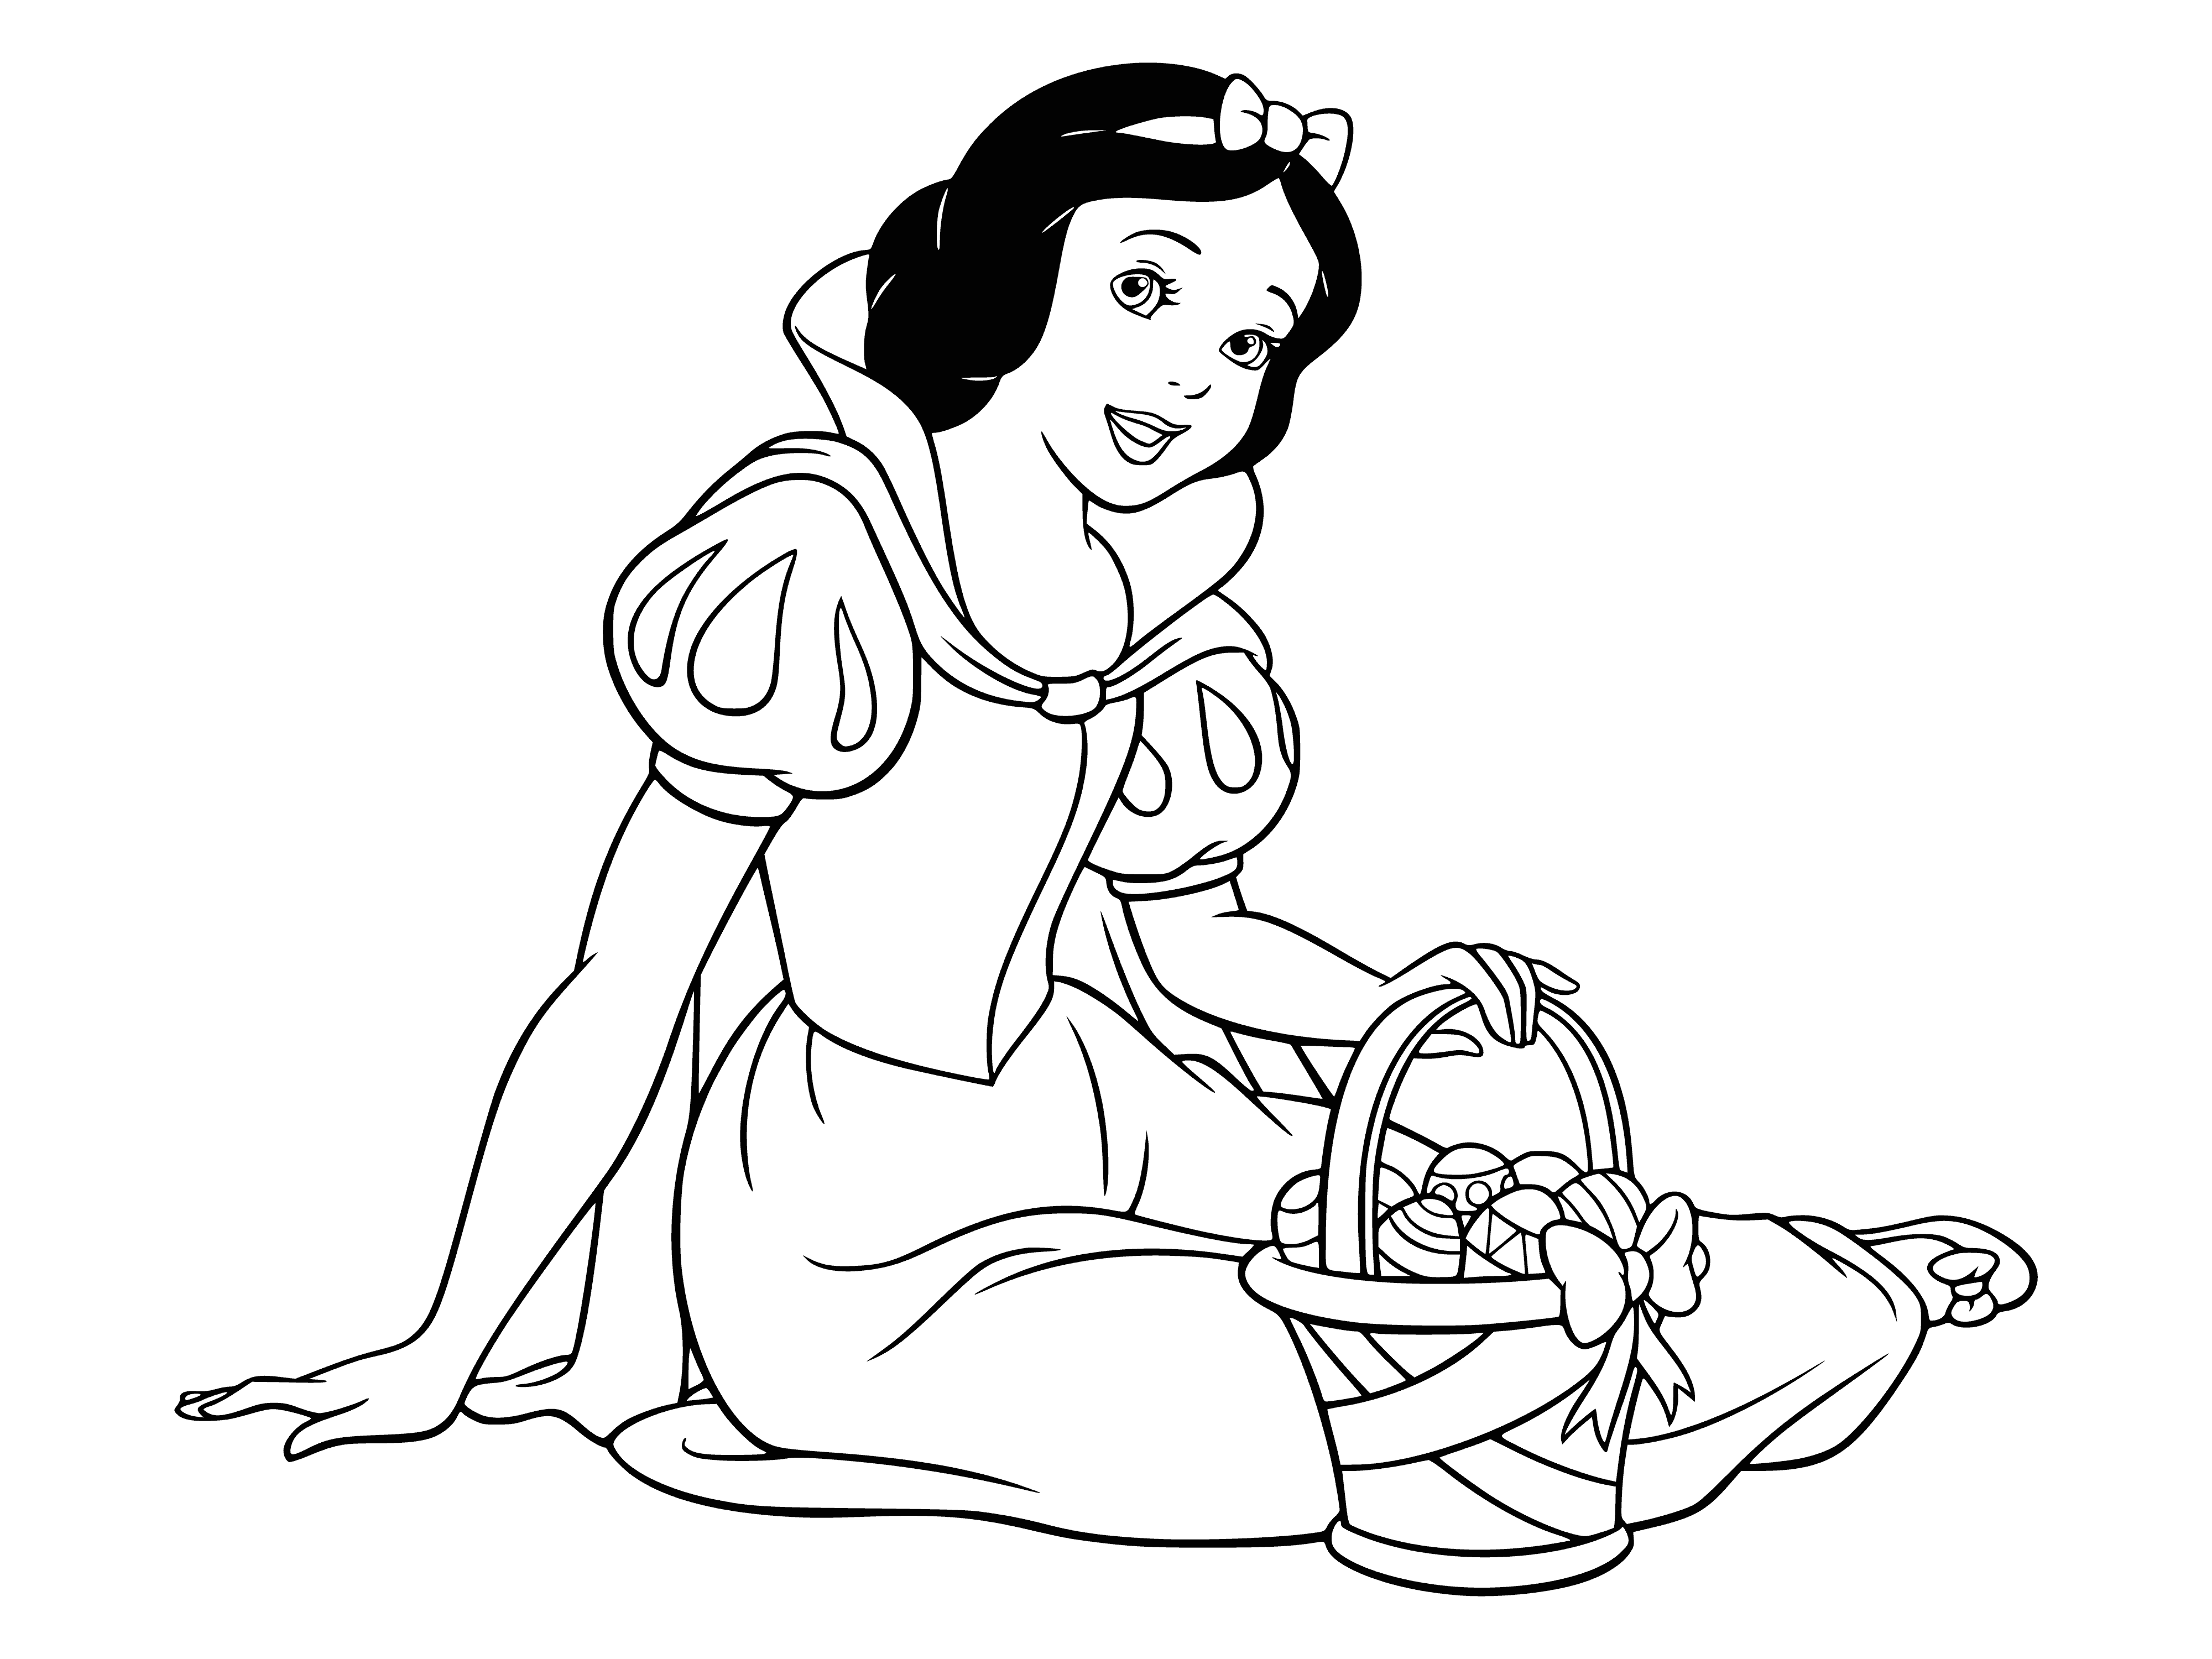 coloring page: Snow White holds Easter eggs & wears blue dress w/ white collar. She looks content & enjoys the bright, hand-painted eggs.